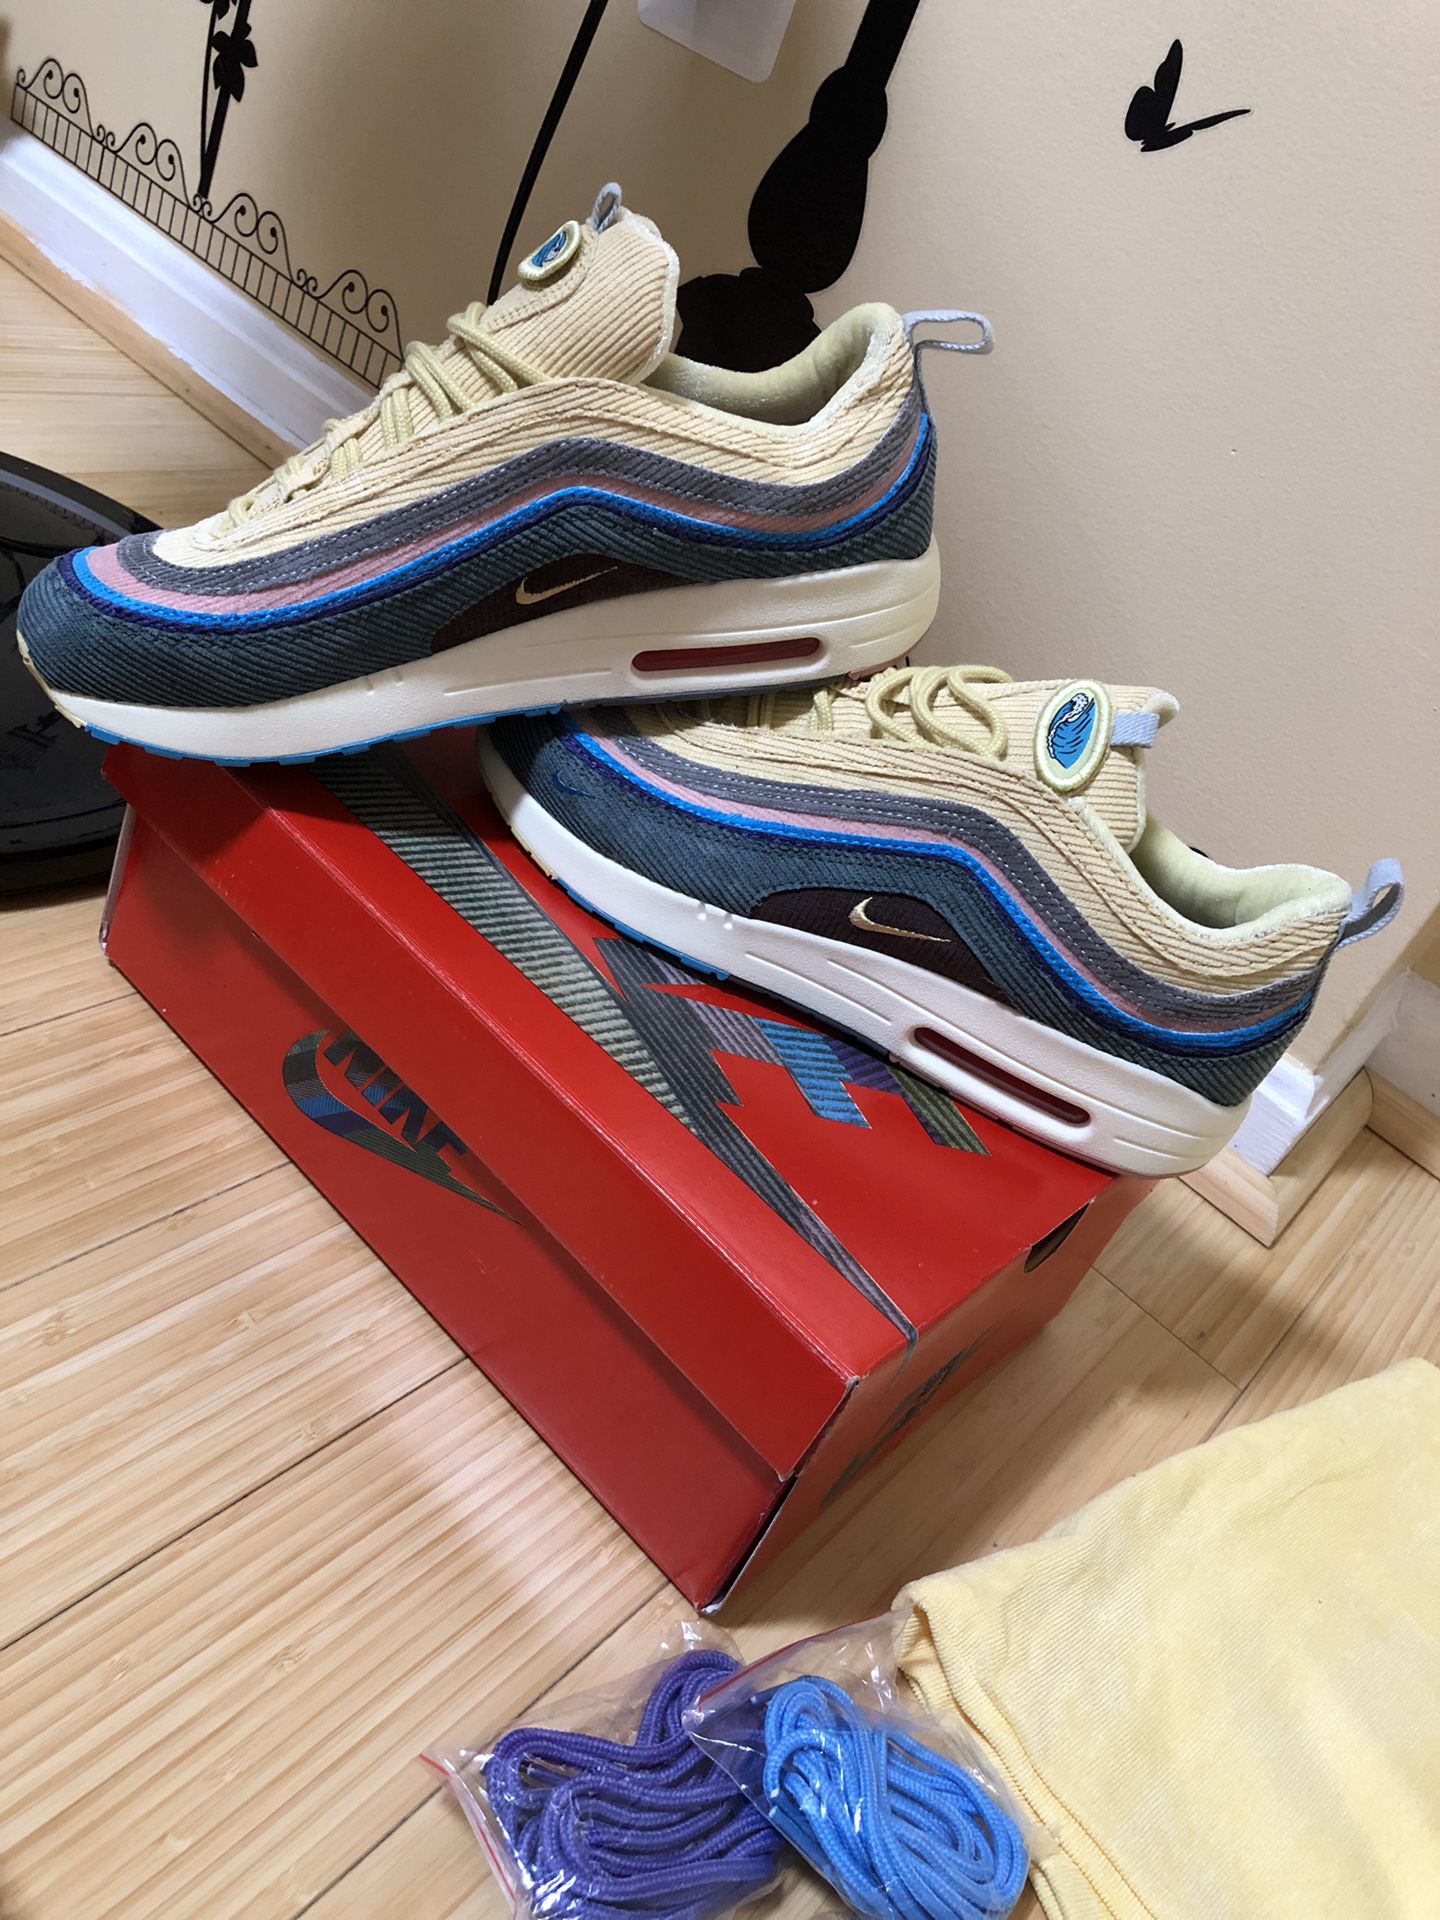 Air Max 1/97 Sean Wotherspoon - Size 10.5